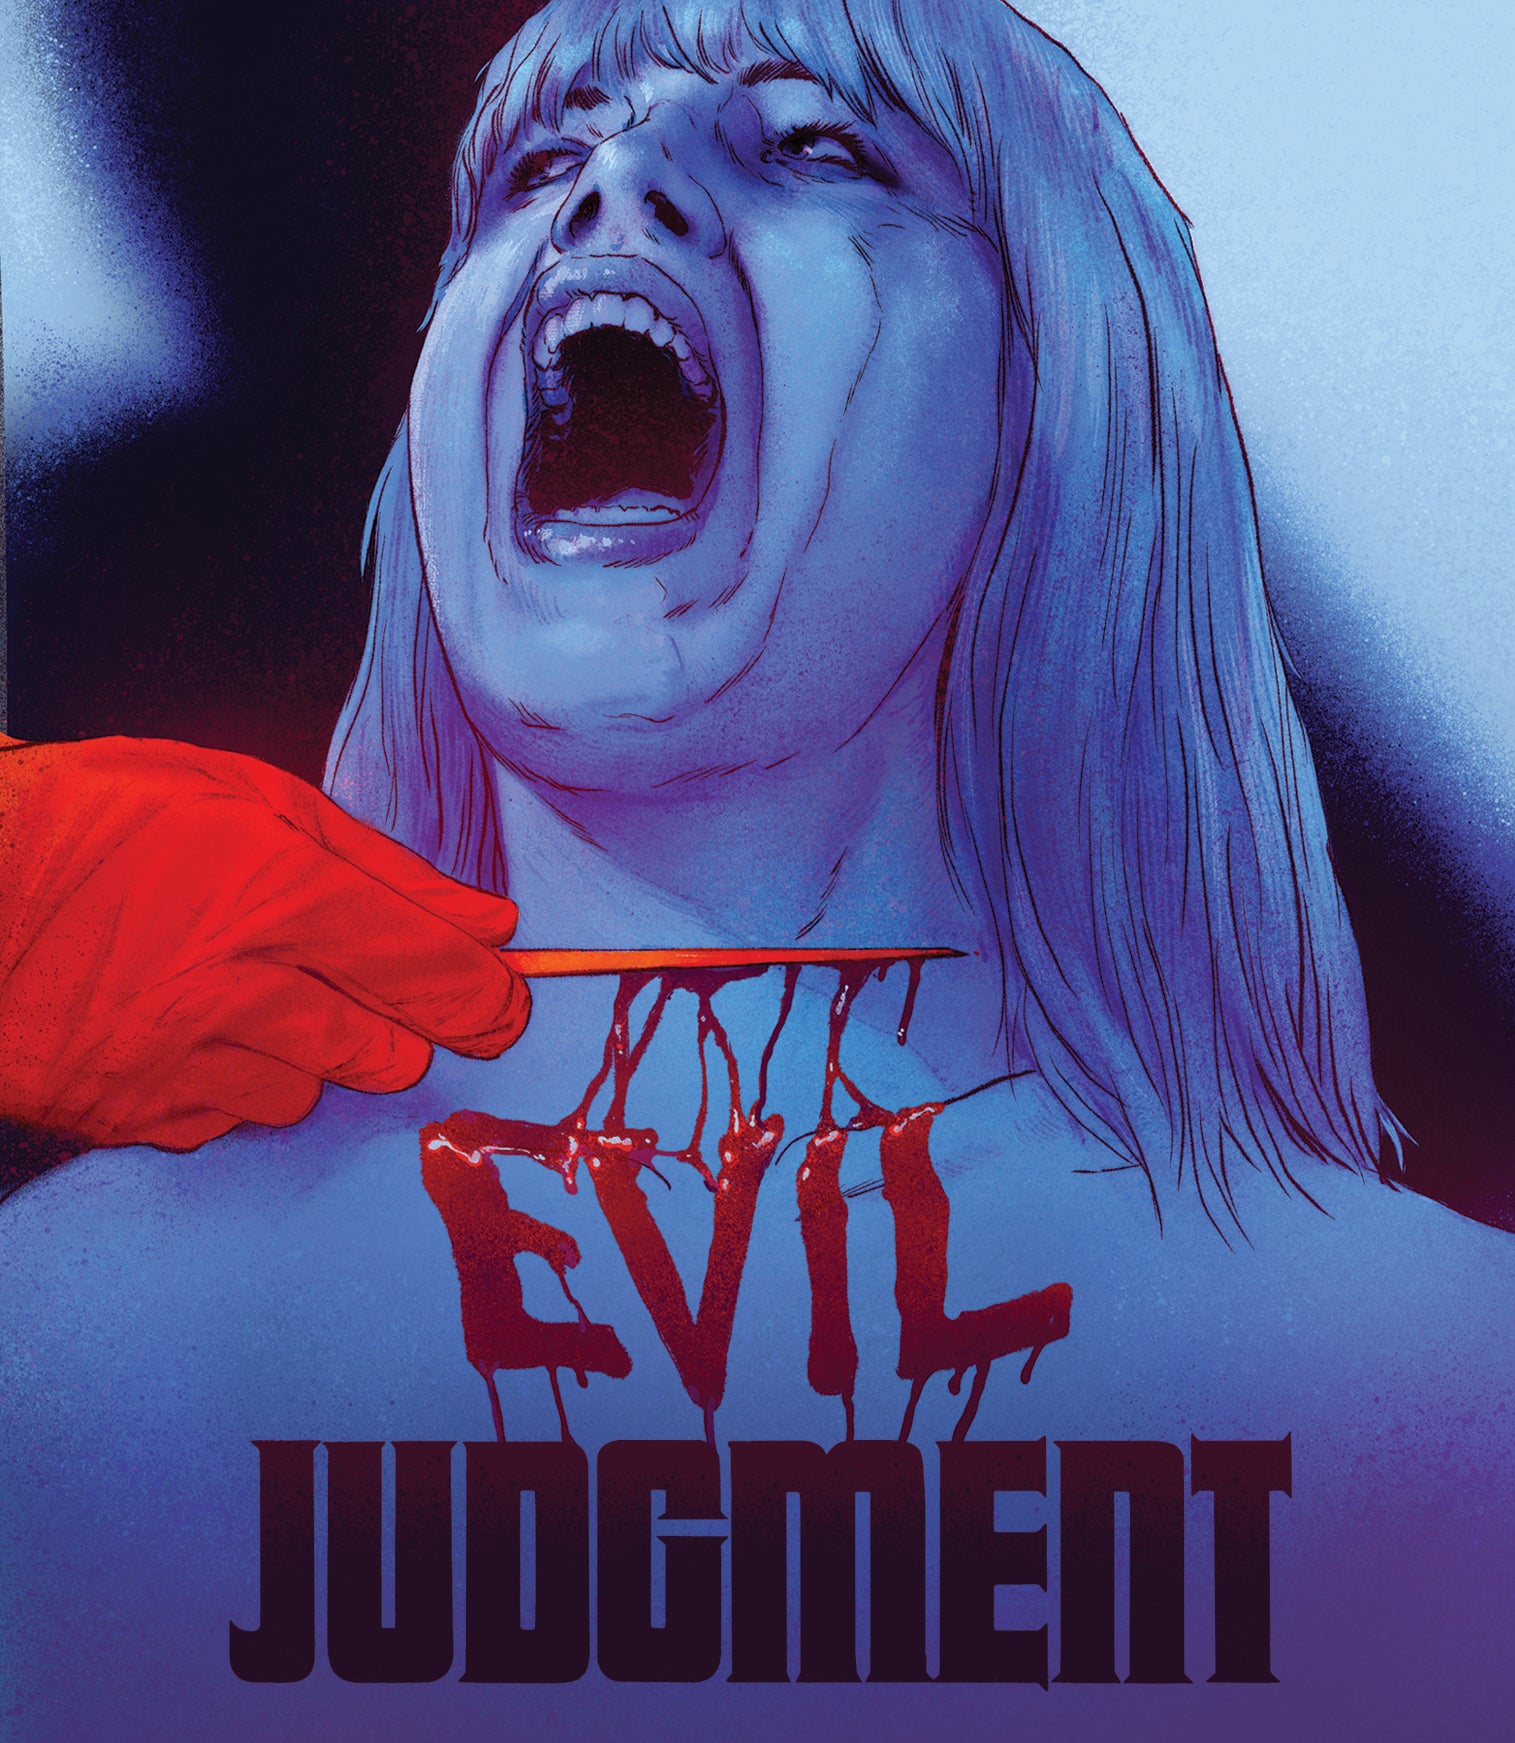 EVIL JUDGMENT (LIMITED EDITION) BLU-RAY